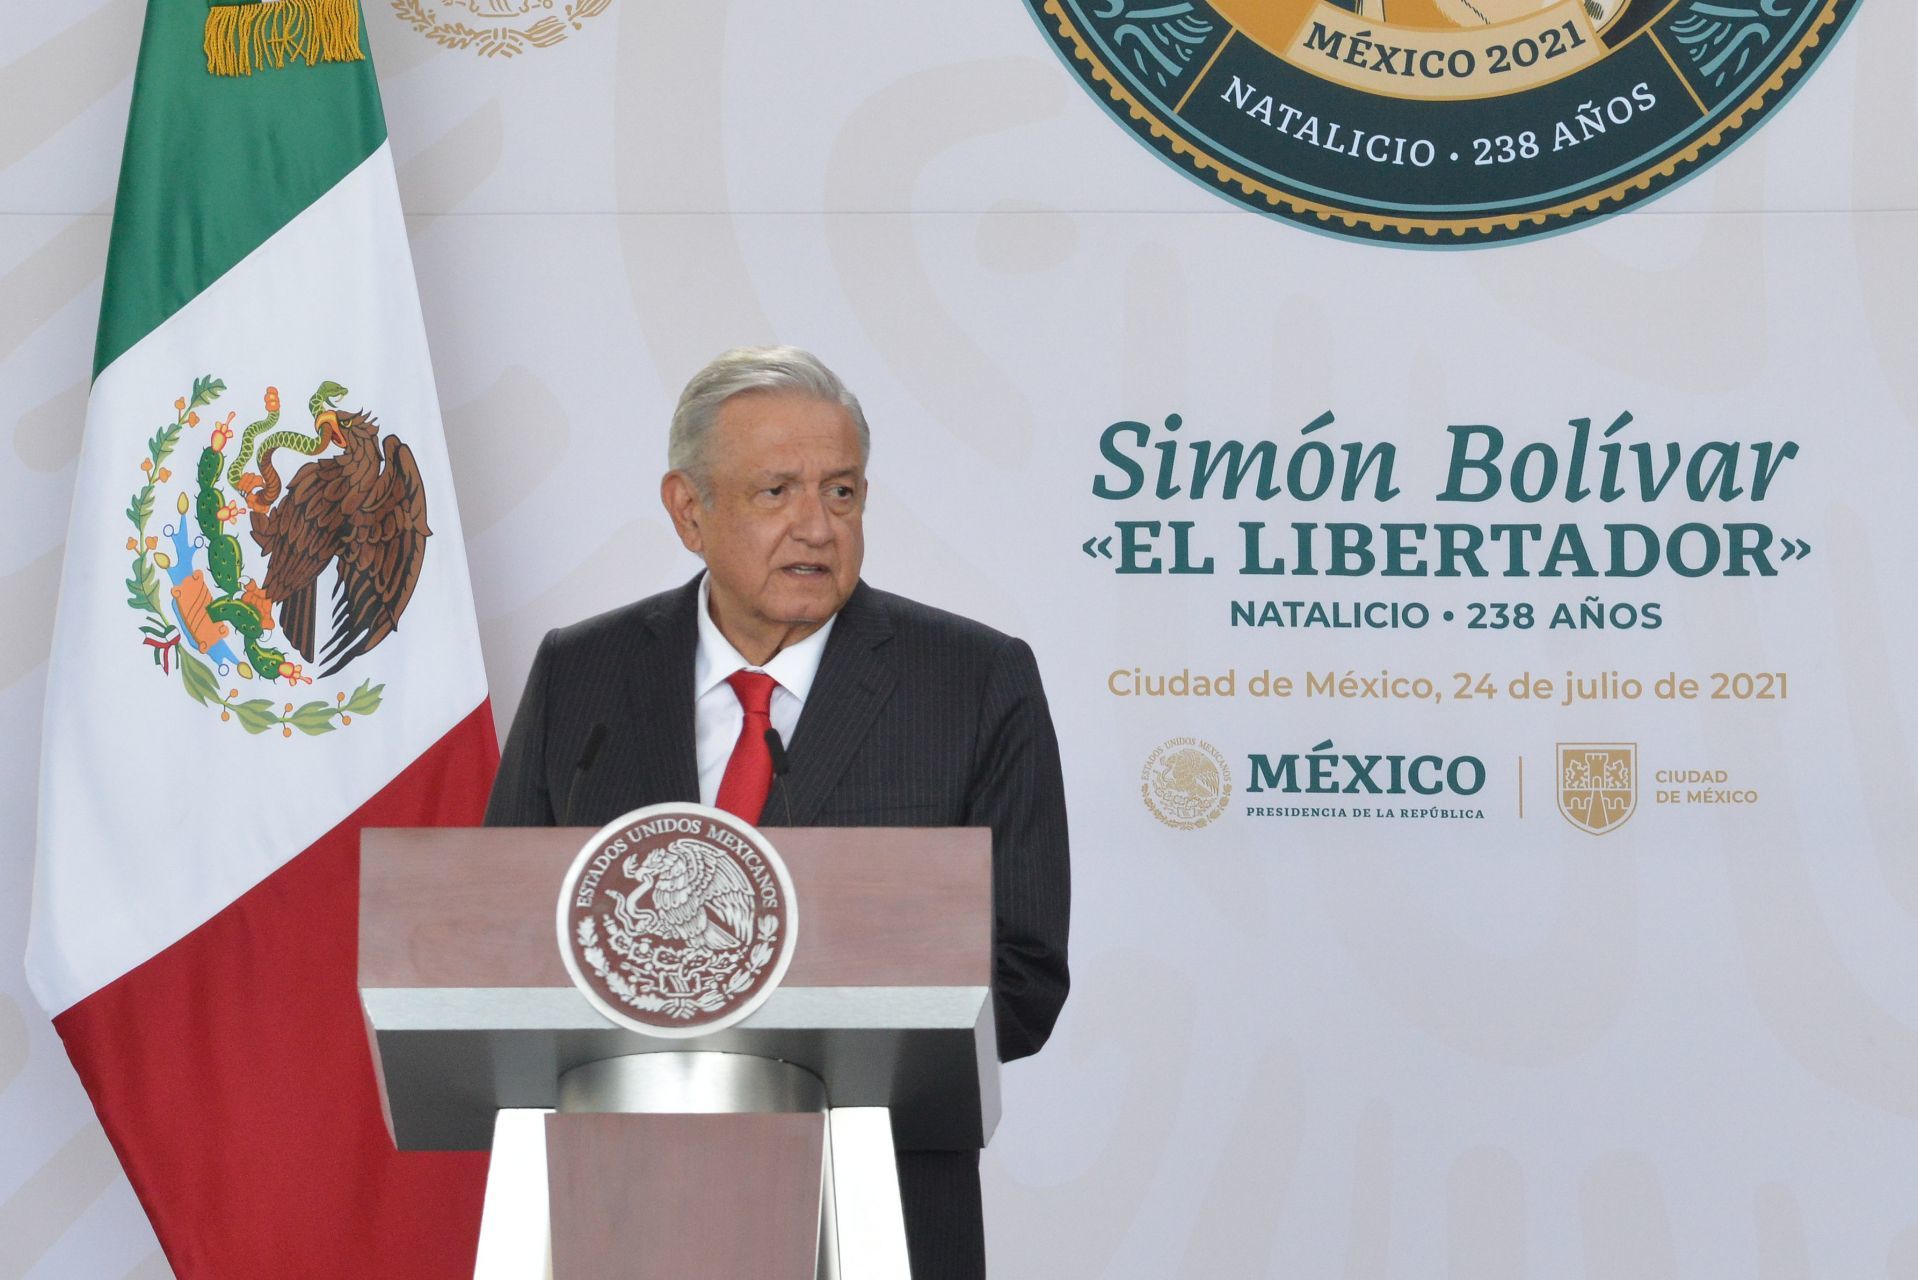 AMLO proposes to replace the OAS and form a bloc like the European Union